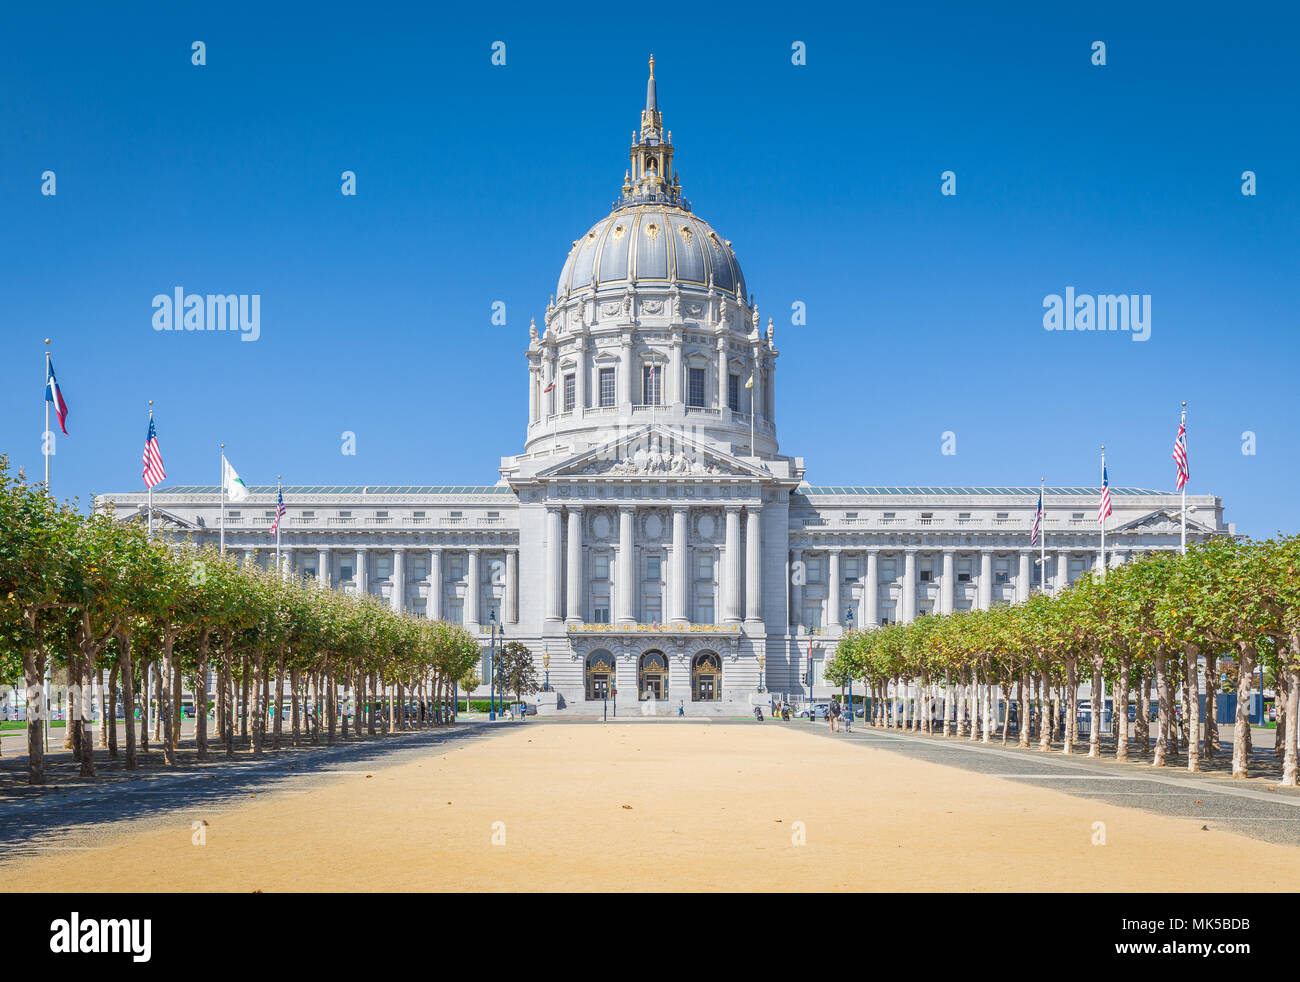 Classic view of historic San Francisco City Hall, the seat of government for the City and County of San Francisco, California, on a sunny day, USA Stock Photo